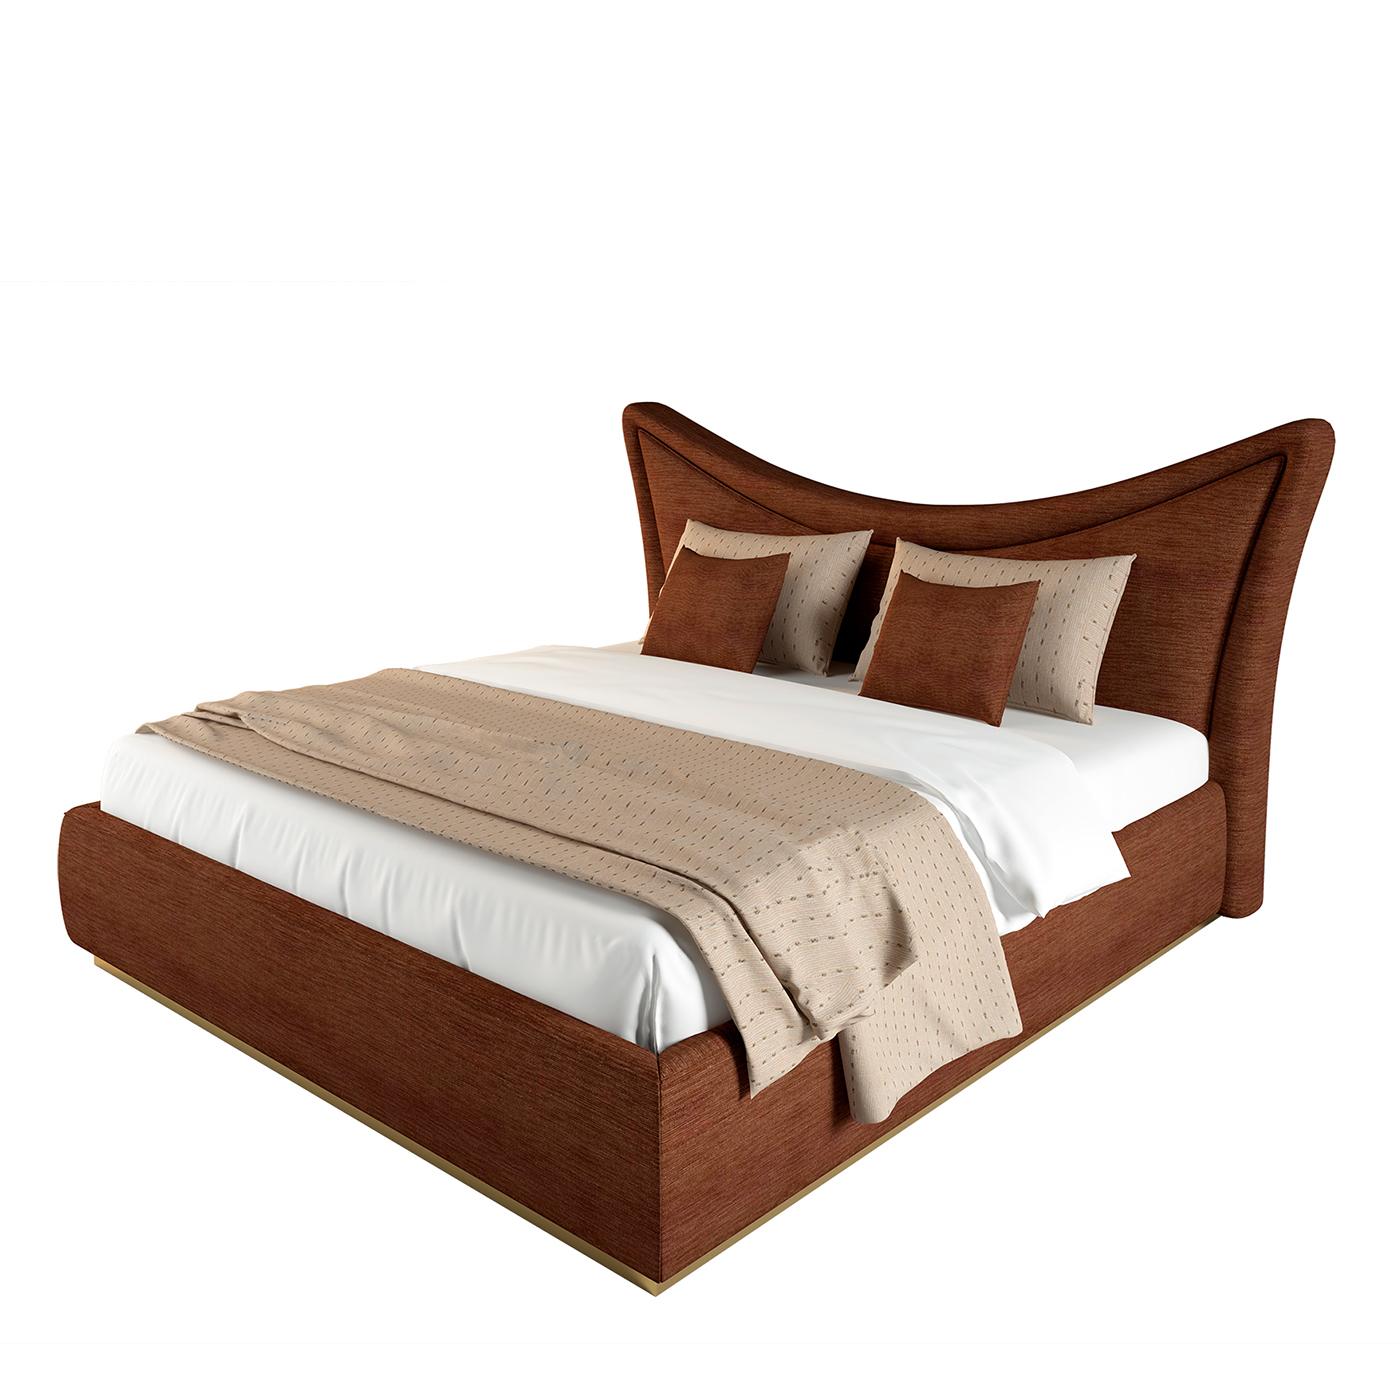 An exceptional design by Hanno Giesler, this bed will make an opulent accent in a refined bedroom. Distinguished by elegant modern lines of vintage inspiration, it features an inwardly-curved headboard upholstered with a refined brown fabric that